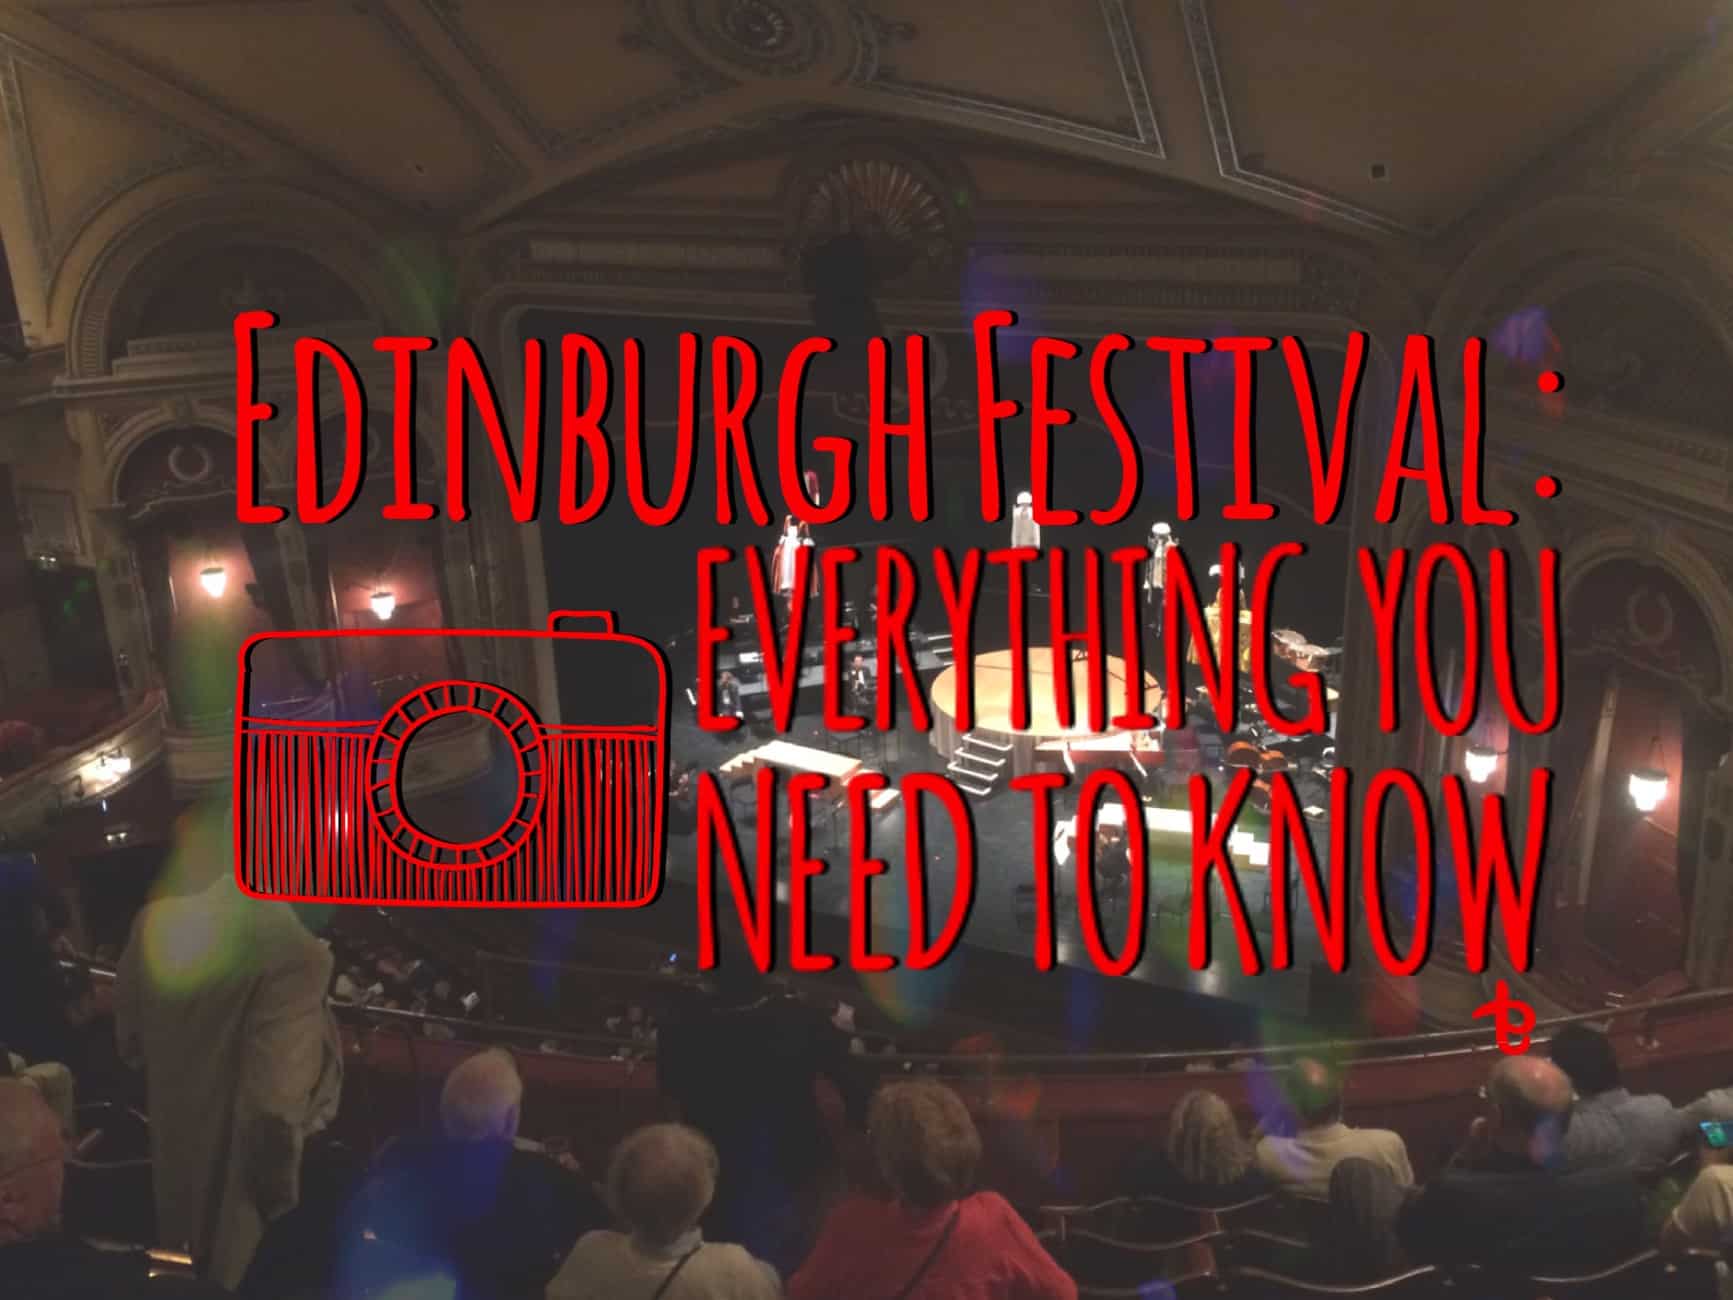 Everything you need to know before attending Edinburgh Festivals